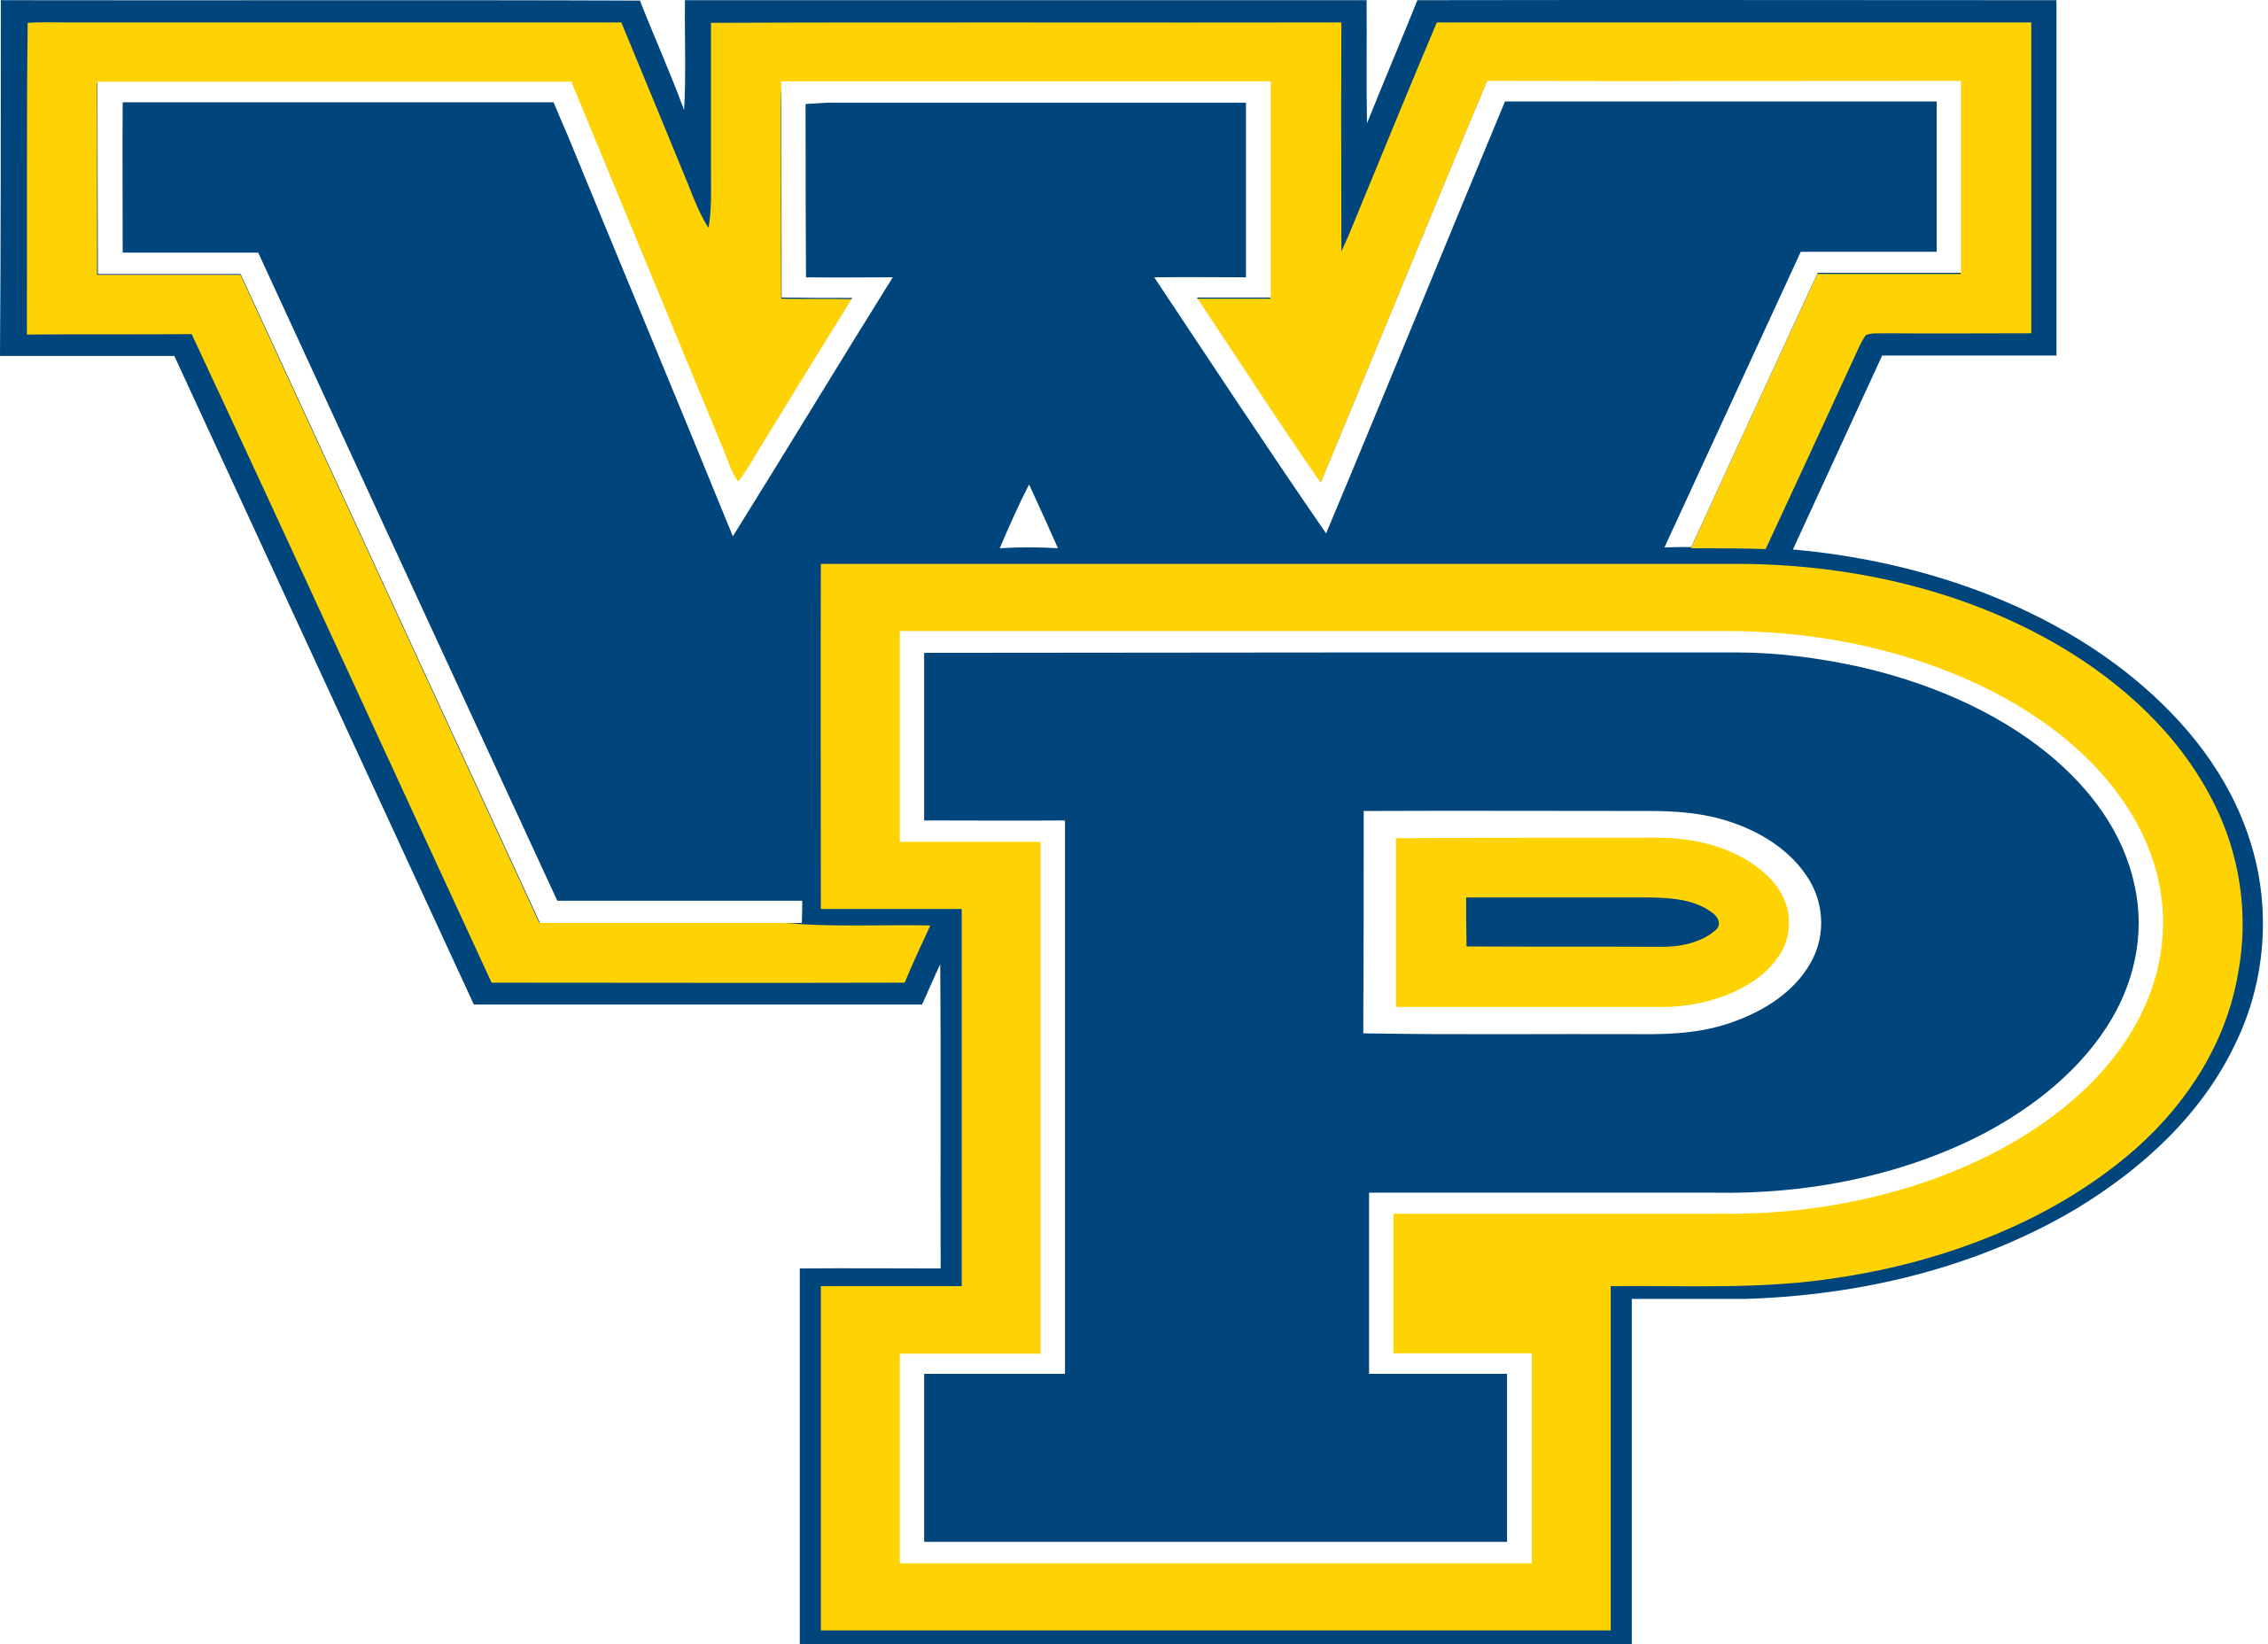 File:William-penn logo from NCAA.svg - Wikimedia Commons